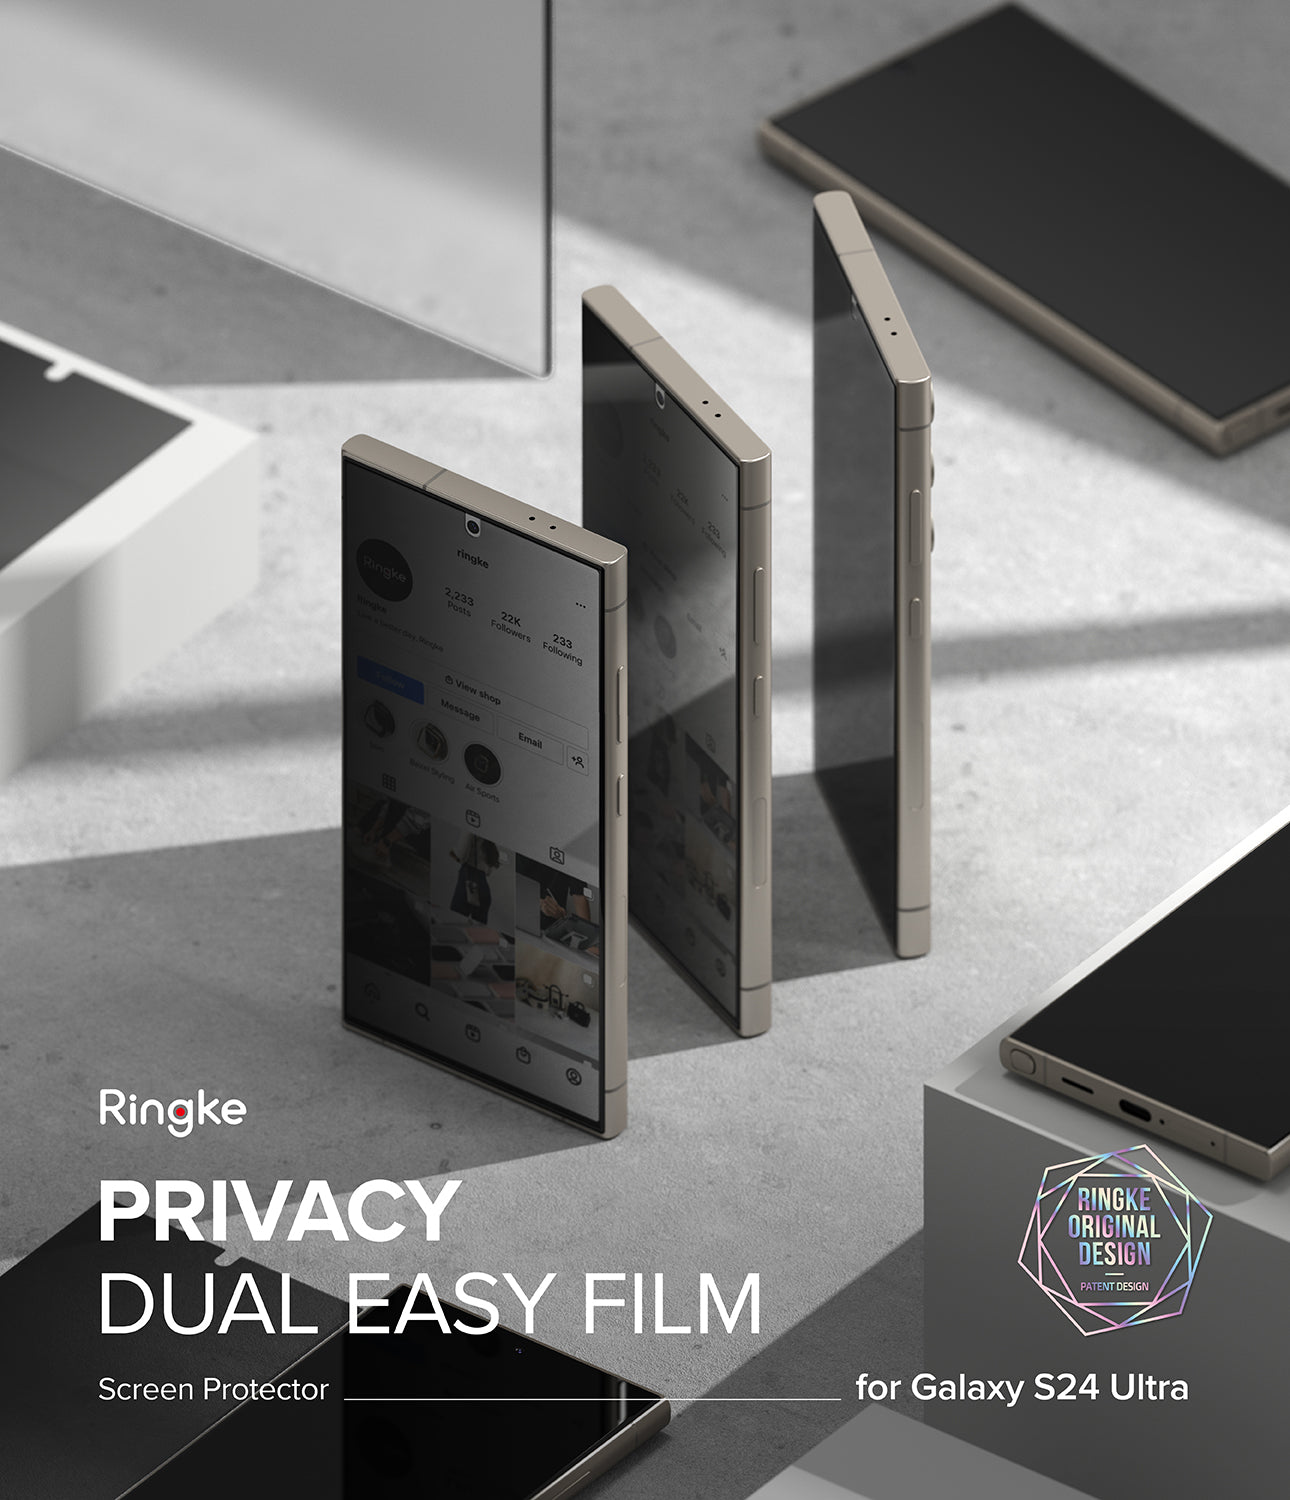 Galaxy S24 Ultra Screen Protector | Privacy Dual Easy Film - By Ringke